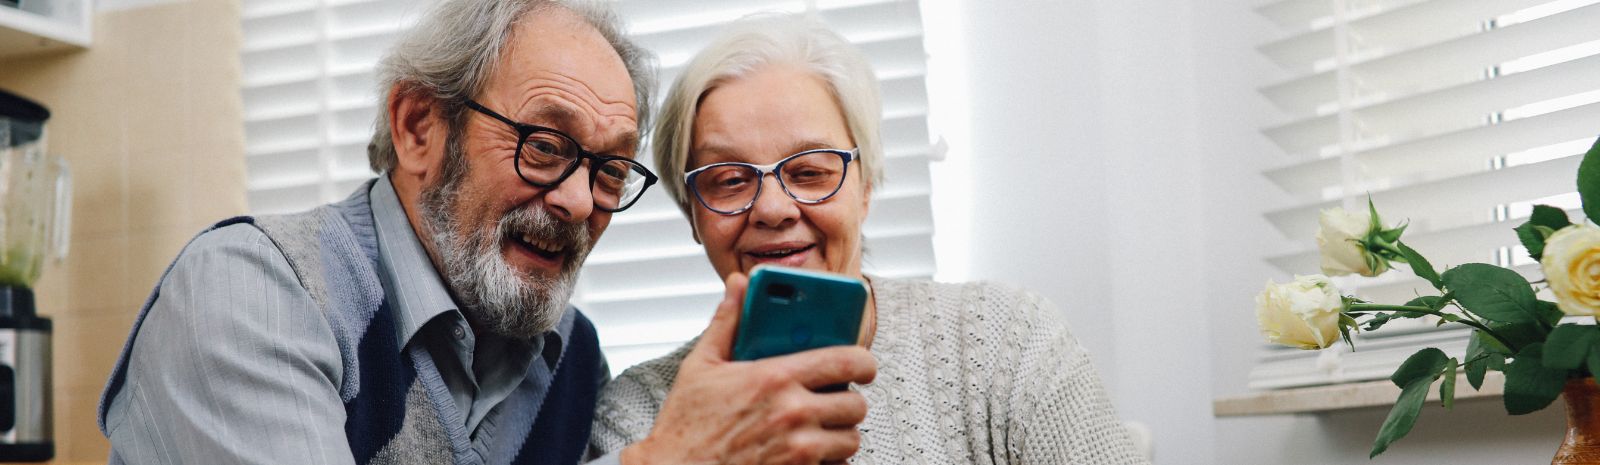 Couple looking at a phone screen